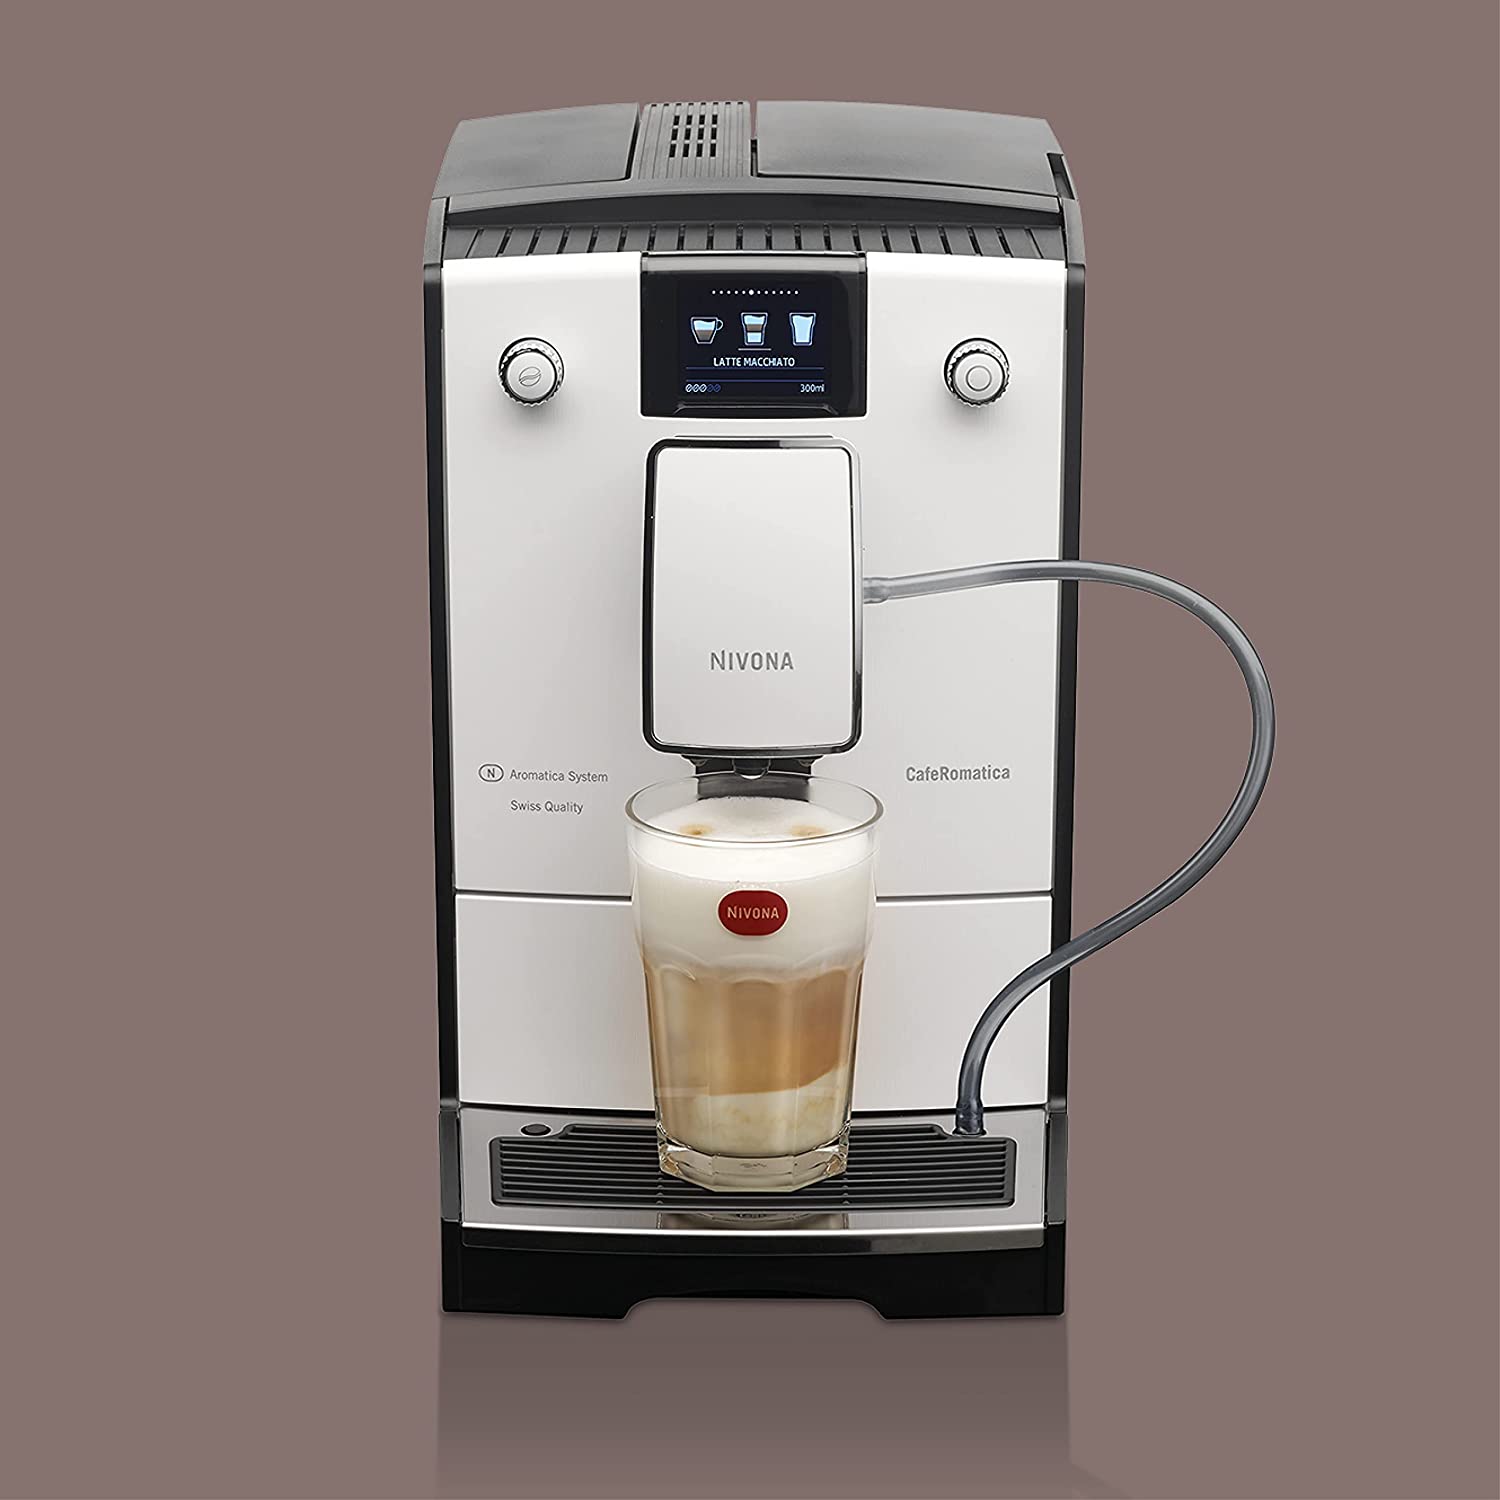 Nivona NICR CafeRomatica 779 Fully Automatic Coffee Machine, Various Materials, 2.2 Litres, White